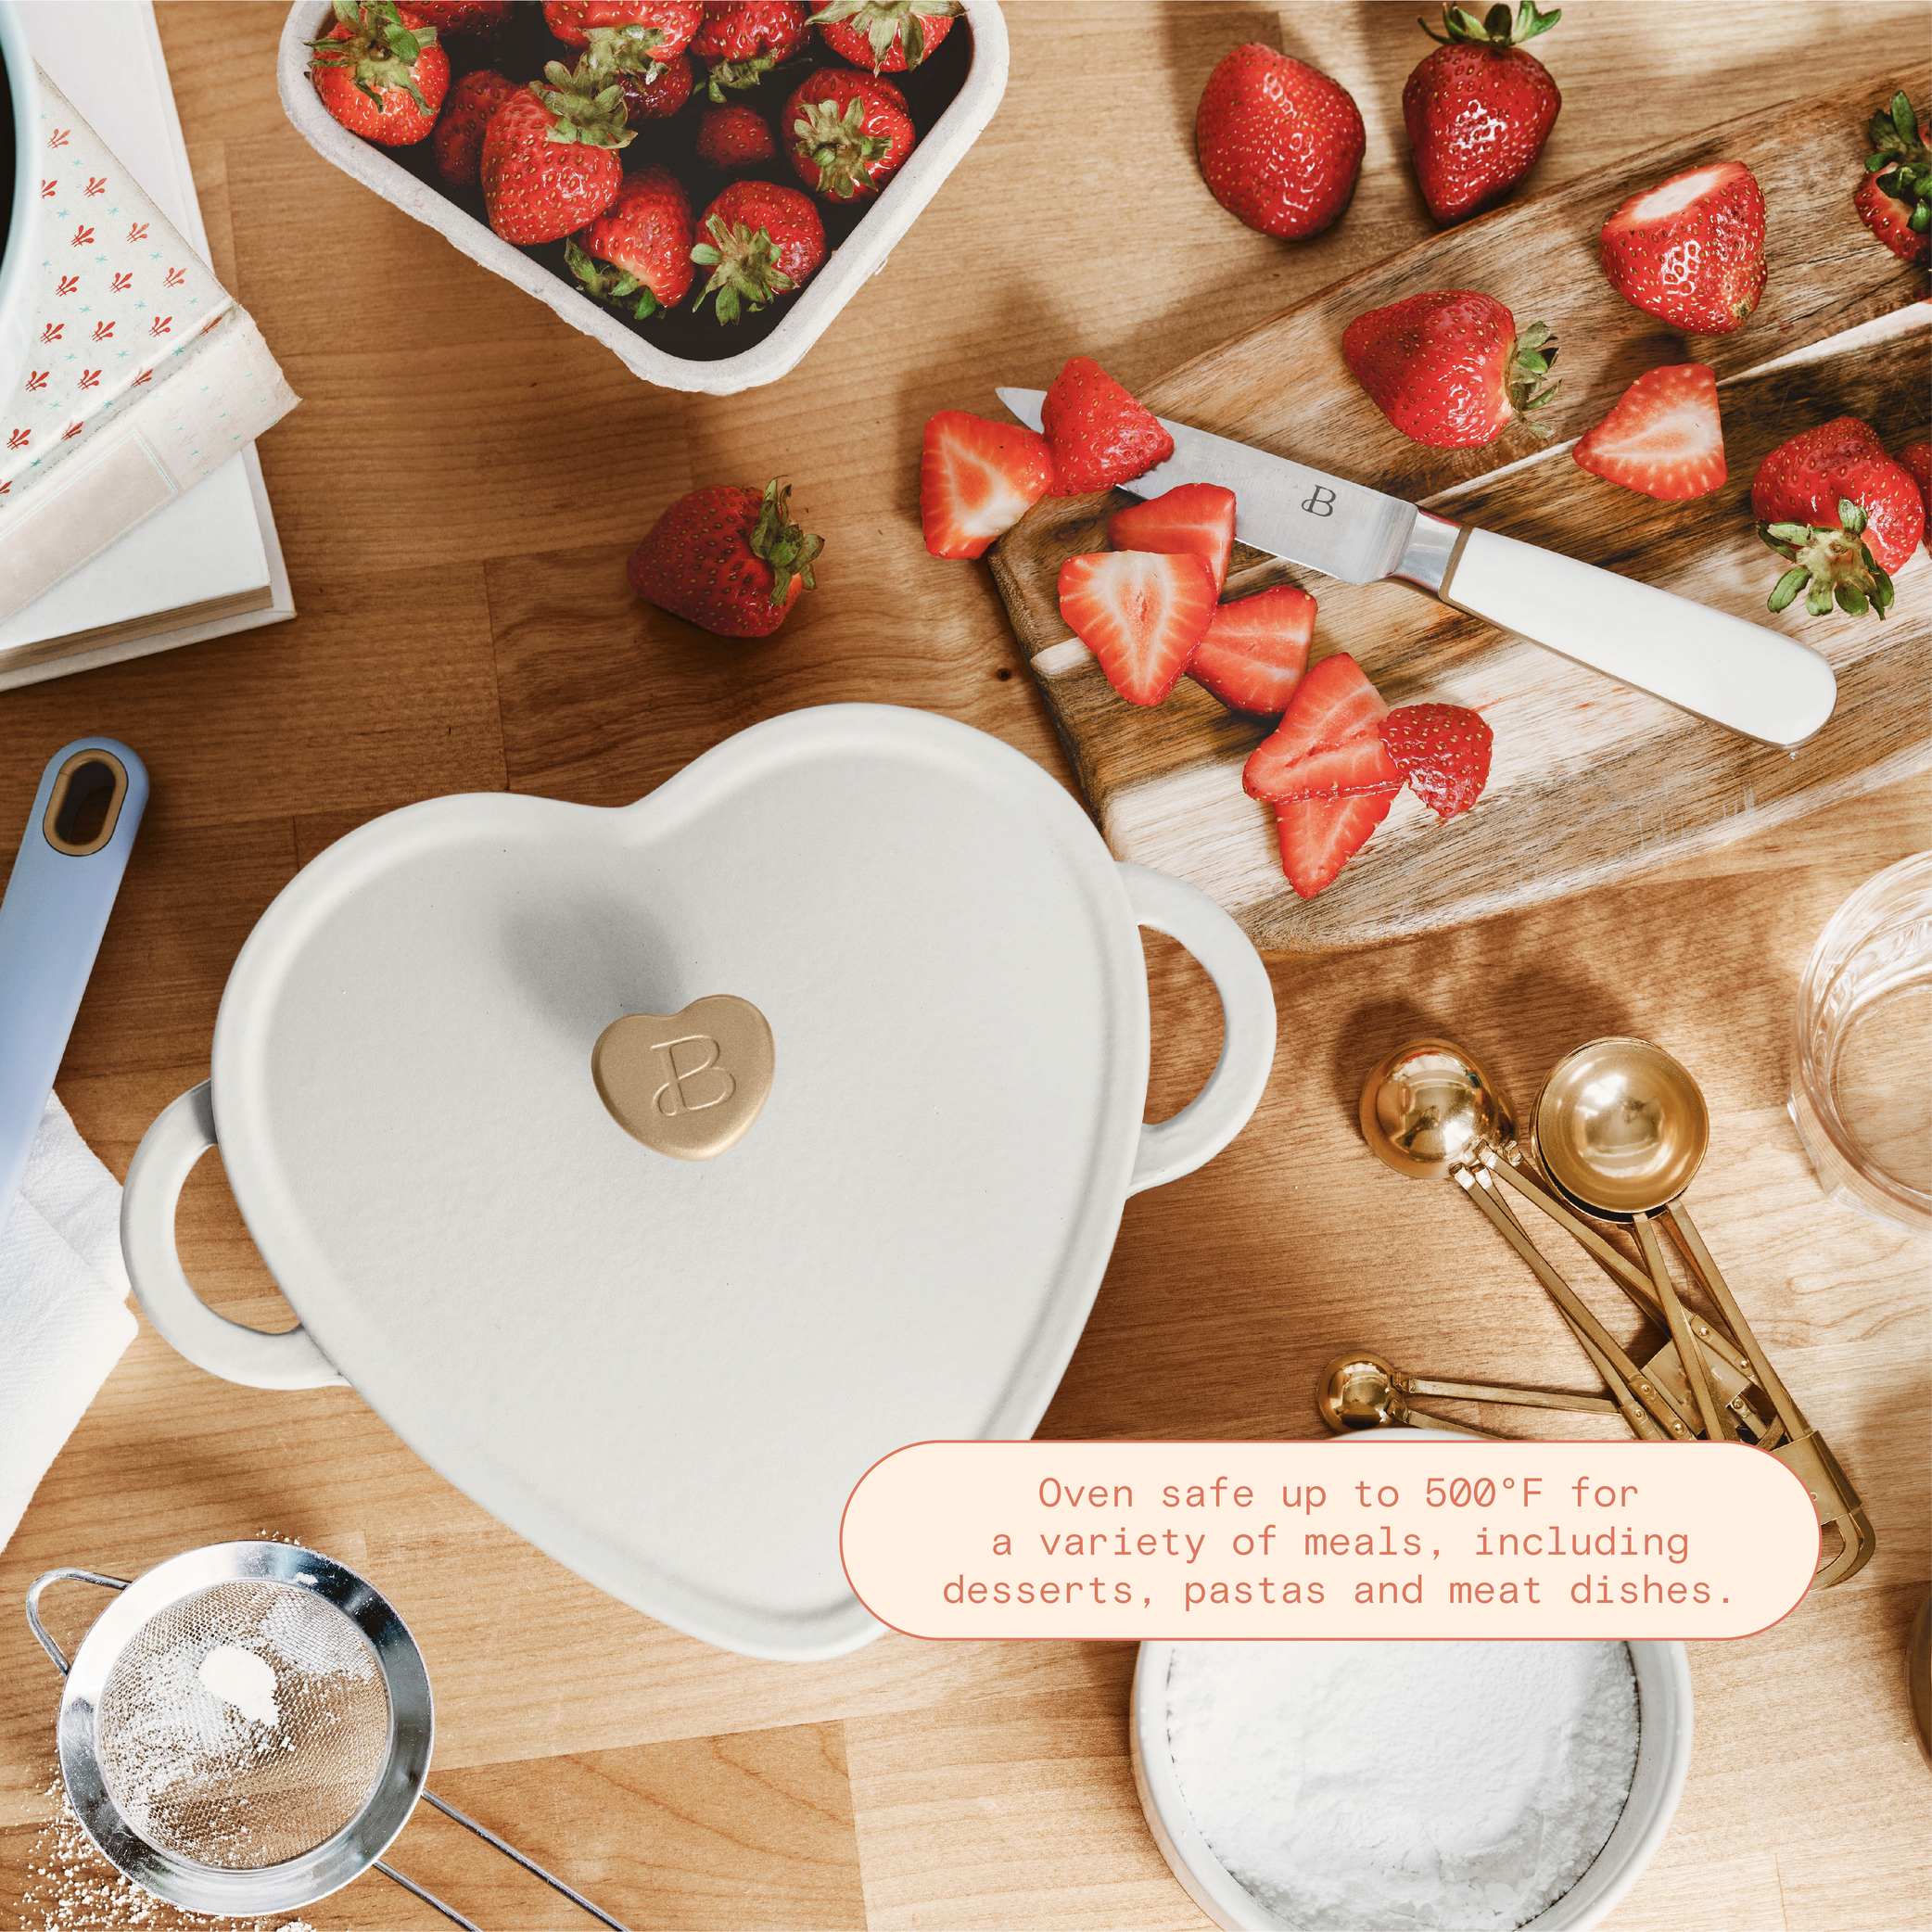 Beautiful 2QT Cast Iron Heart Shaped Dutch Oven, White Icing by Drew Barrymore - image 5 of 11